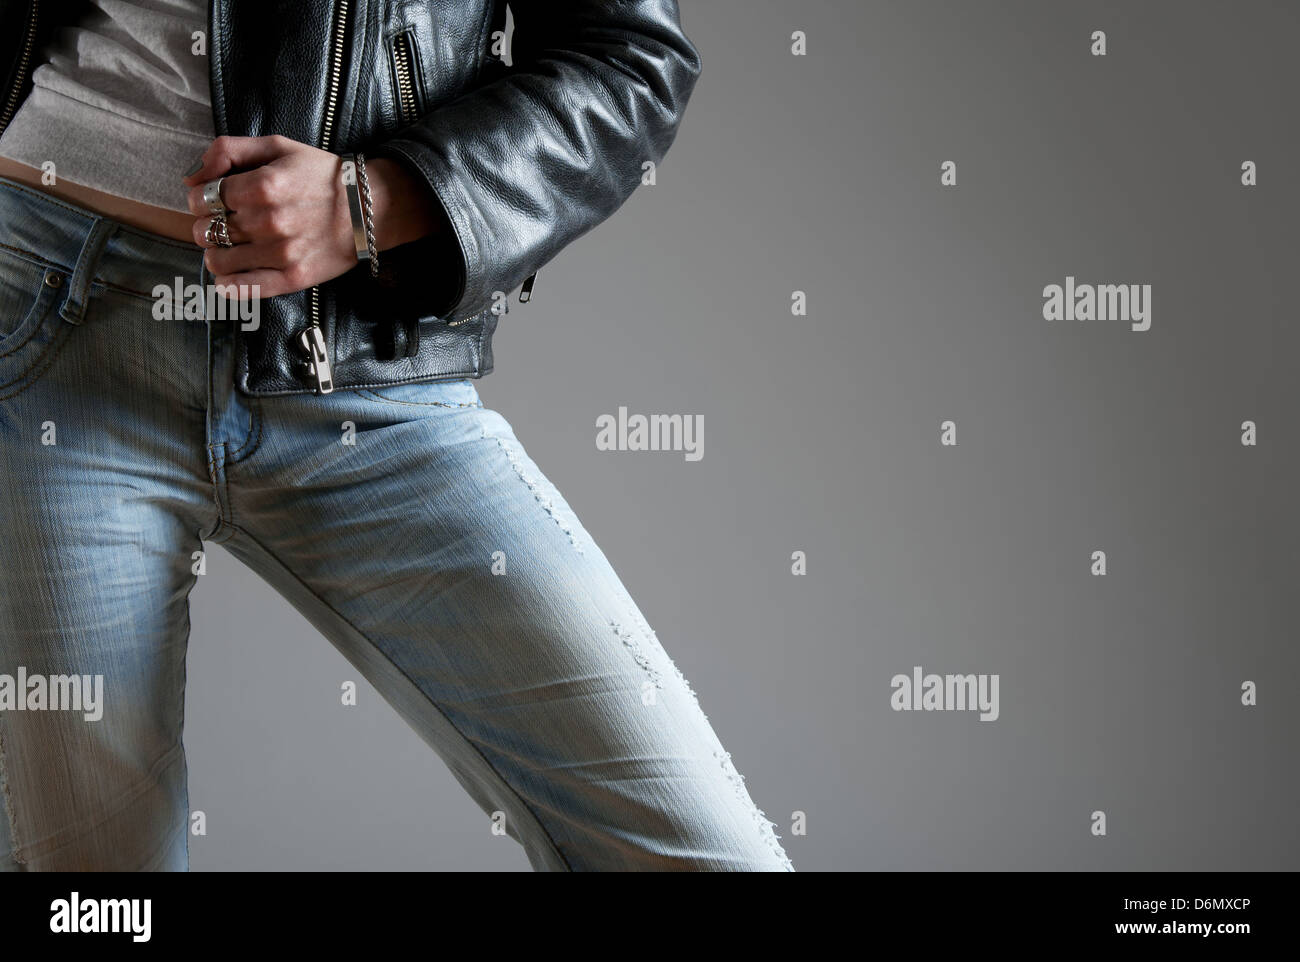 Young woman wearing jeans and black leather jacket. Stock Photo